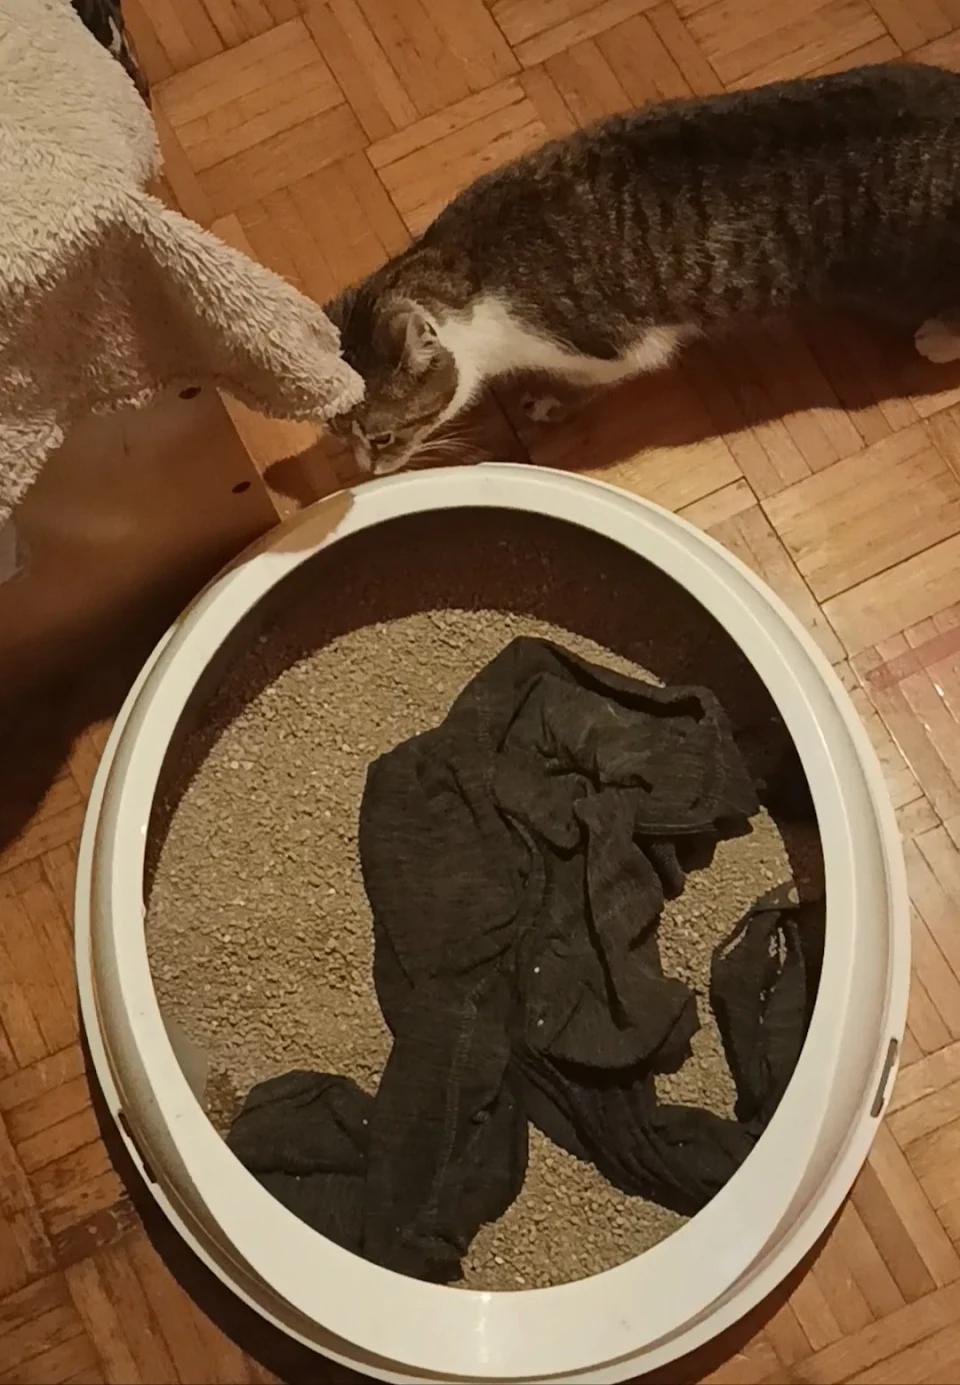 My cat steals clothes from my closet and then brings the item she stole to her litterbox, in which she carefully places it so the item of clothing is always fully inside it, no matter how big.